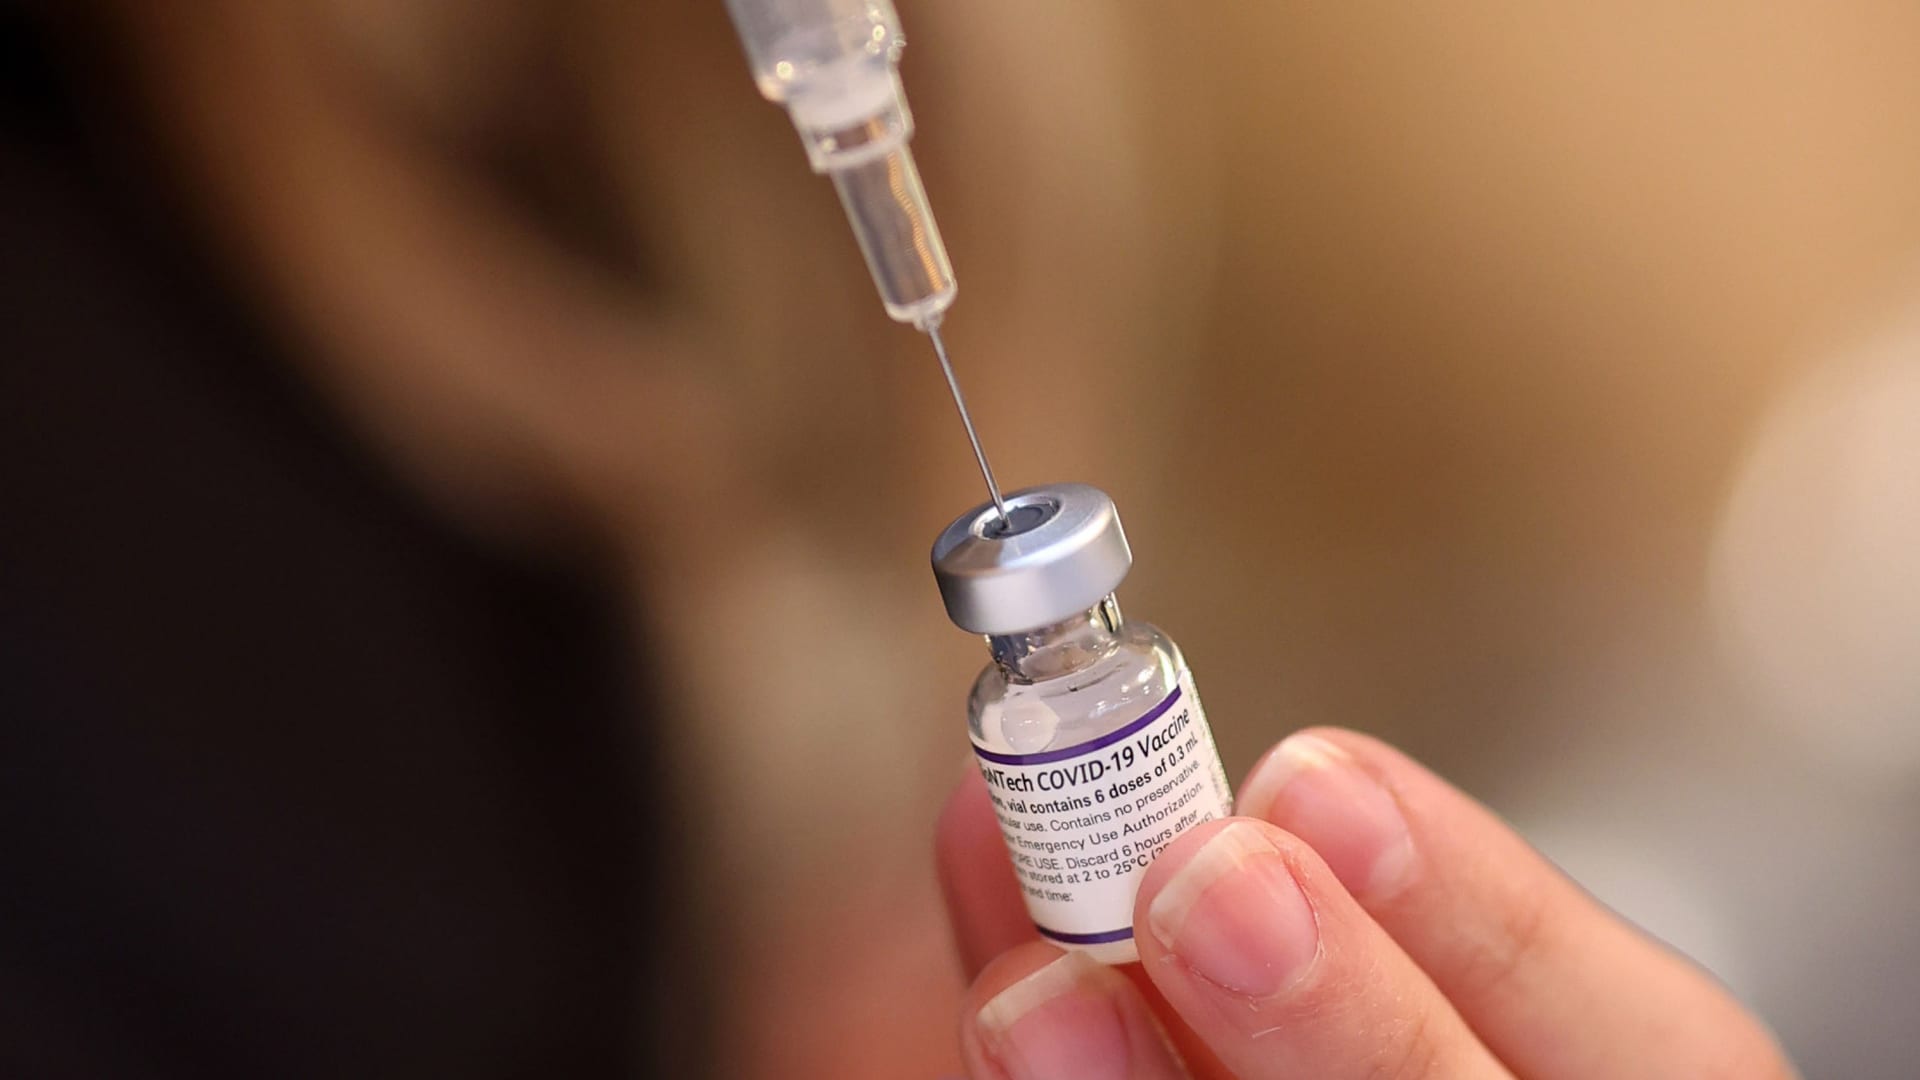 Updated Covid vaccines should have ‘reasonable’ prices: HHS